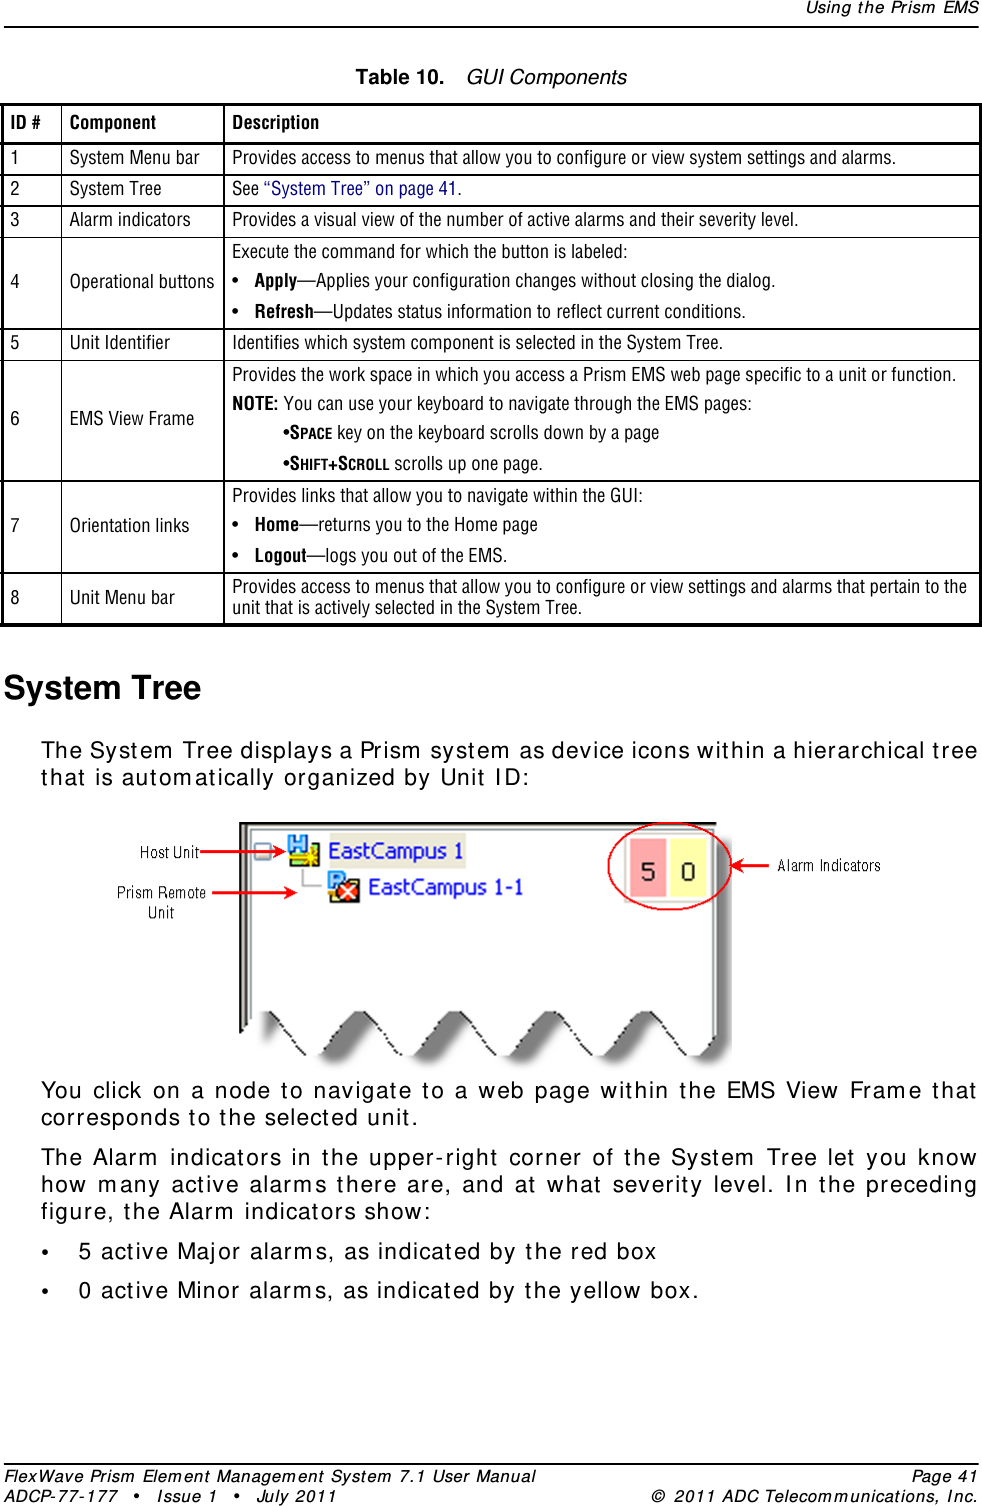 Using t he Prism  EMSFlexWave Prism  Elem ent Managem ent  Syst em  7.1 User Manual Page 41ADCP- 77- 1 77 • I ssue 1 • July 2011 ©  2011 ADC Telecom m unications, I nc.System TreeThe Syst em  Tree displays a Prism  syst em  as device icons wit hin a hierarchical tree that is autom at ically organized by Unit  I D:You click on a node t o navigat e t o a web page wit hin the EMS View Fram e t hat corresponds to the select ed unit .The Alarm  indicators in t he upper-right corner of the Syst em  Tree let you know how m any active alarm s t here are, and at what  severity level. I n the preceding figure, the Alarm  indicators show:•5 act ive Maj or alarm s, as indicat ed by t he red box•0 act ive Minor alarm s, as indicat ed by the yellow box.Table 10. GUI ComponentsID # Component Description1System Menu bar Provides access to menus that allow you to configure or view system settings and alarms.2System Tree See “System Tree” on page 41.3Alarm indicators Provides a visual view of the number of active alarms and their severity level.4Operational buttonsExecute the command for which the button is labeled:•Apply—Applies your configuration changes without closing the dialog.•Refresh—Updates status information to reflect current conditions.5Unit Identifier Identifies which system component is selected in the System Tree.6EMS View FrameProvides the work space in which you access a Prism EMS web page specific to a unit or function.NOTE: You can use your keyboard to navigate through the EMS pages:•SPACE key on the keyboard scrolls down by a page•SHIFT+SCROLL scrolls up one page.7Orientation linksProvides links that allow you to navigate within the GUI:•Home—returns you to the Home page•Logout—logs you out of the EMS.8Unit Menu bar Provides access to menus that allow you to configure or view settings and alarms that pertain to the unit that is actively selected in the System Tree.